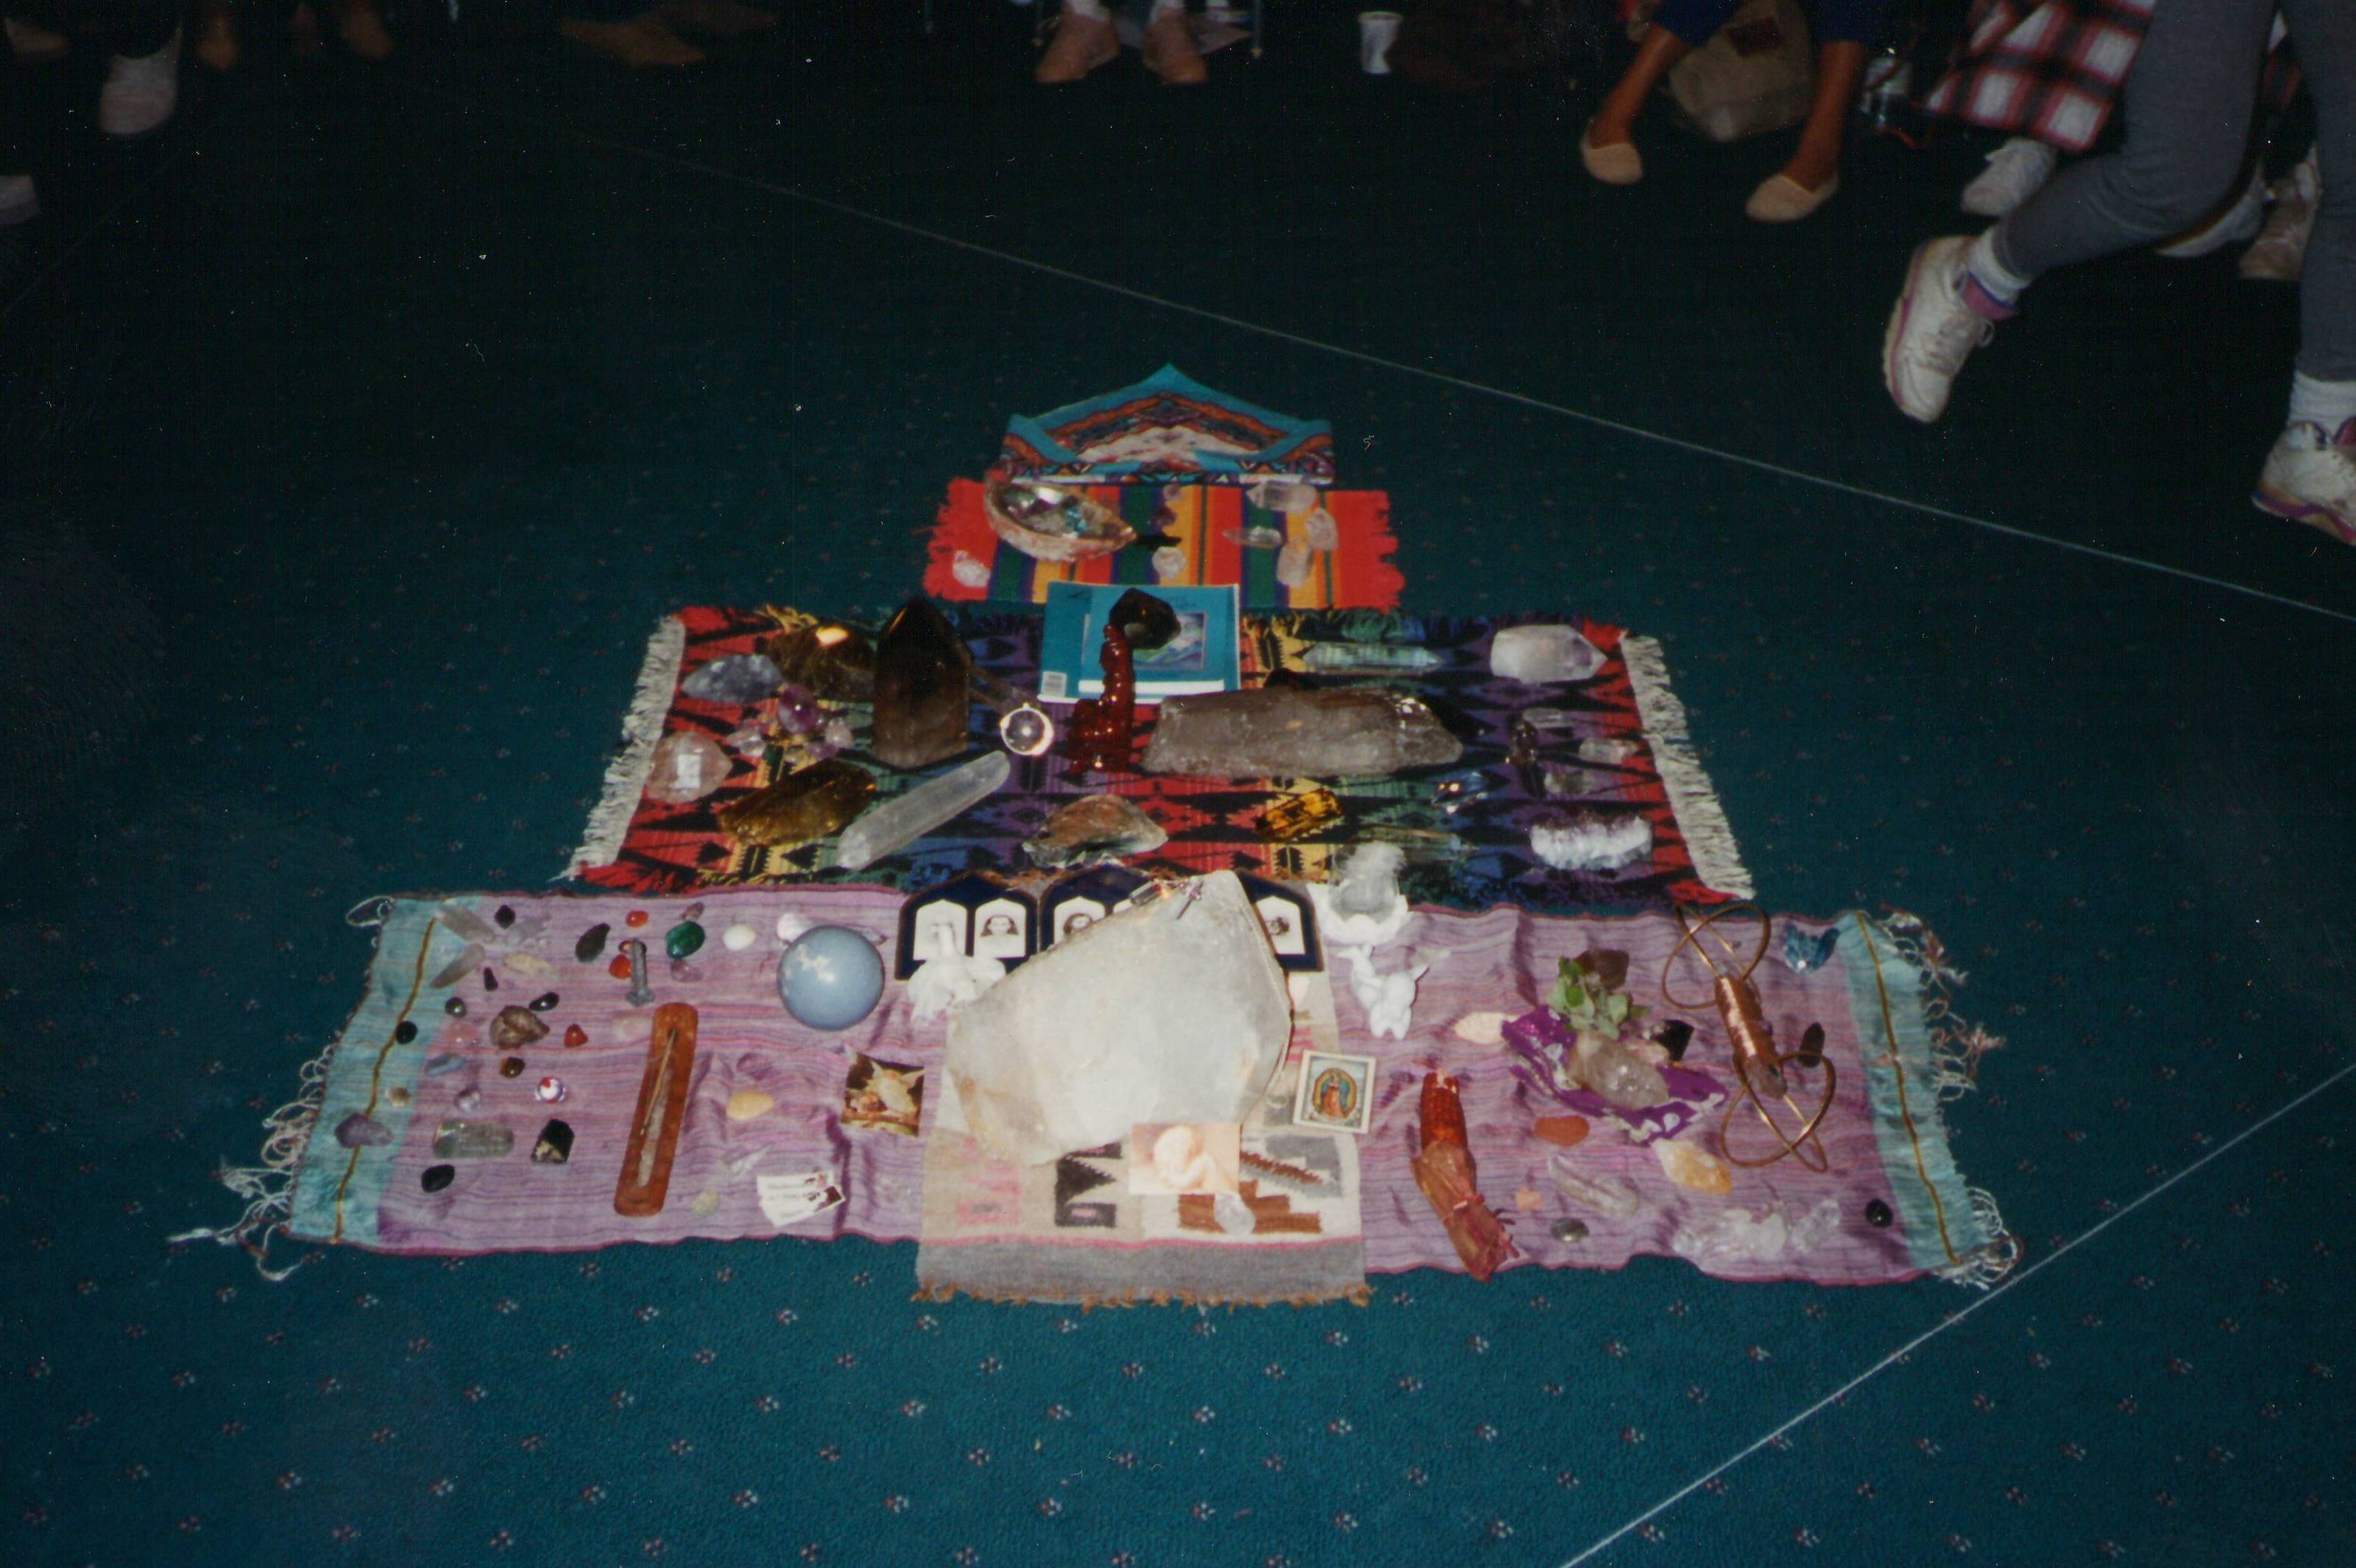 Altars can be temporary or permanent